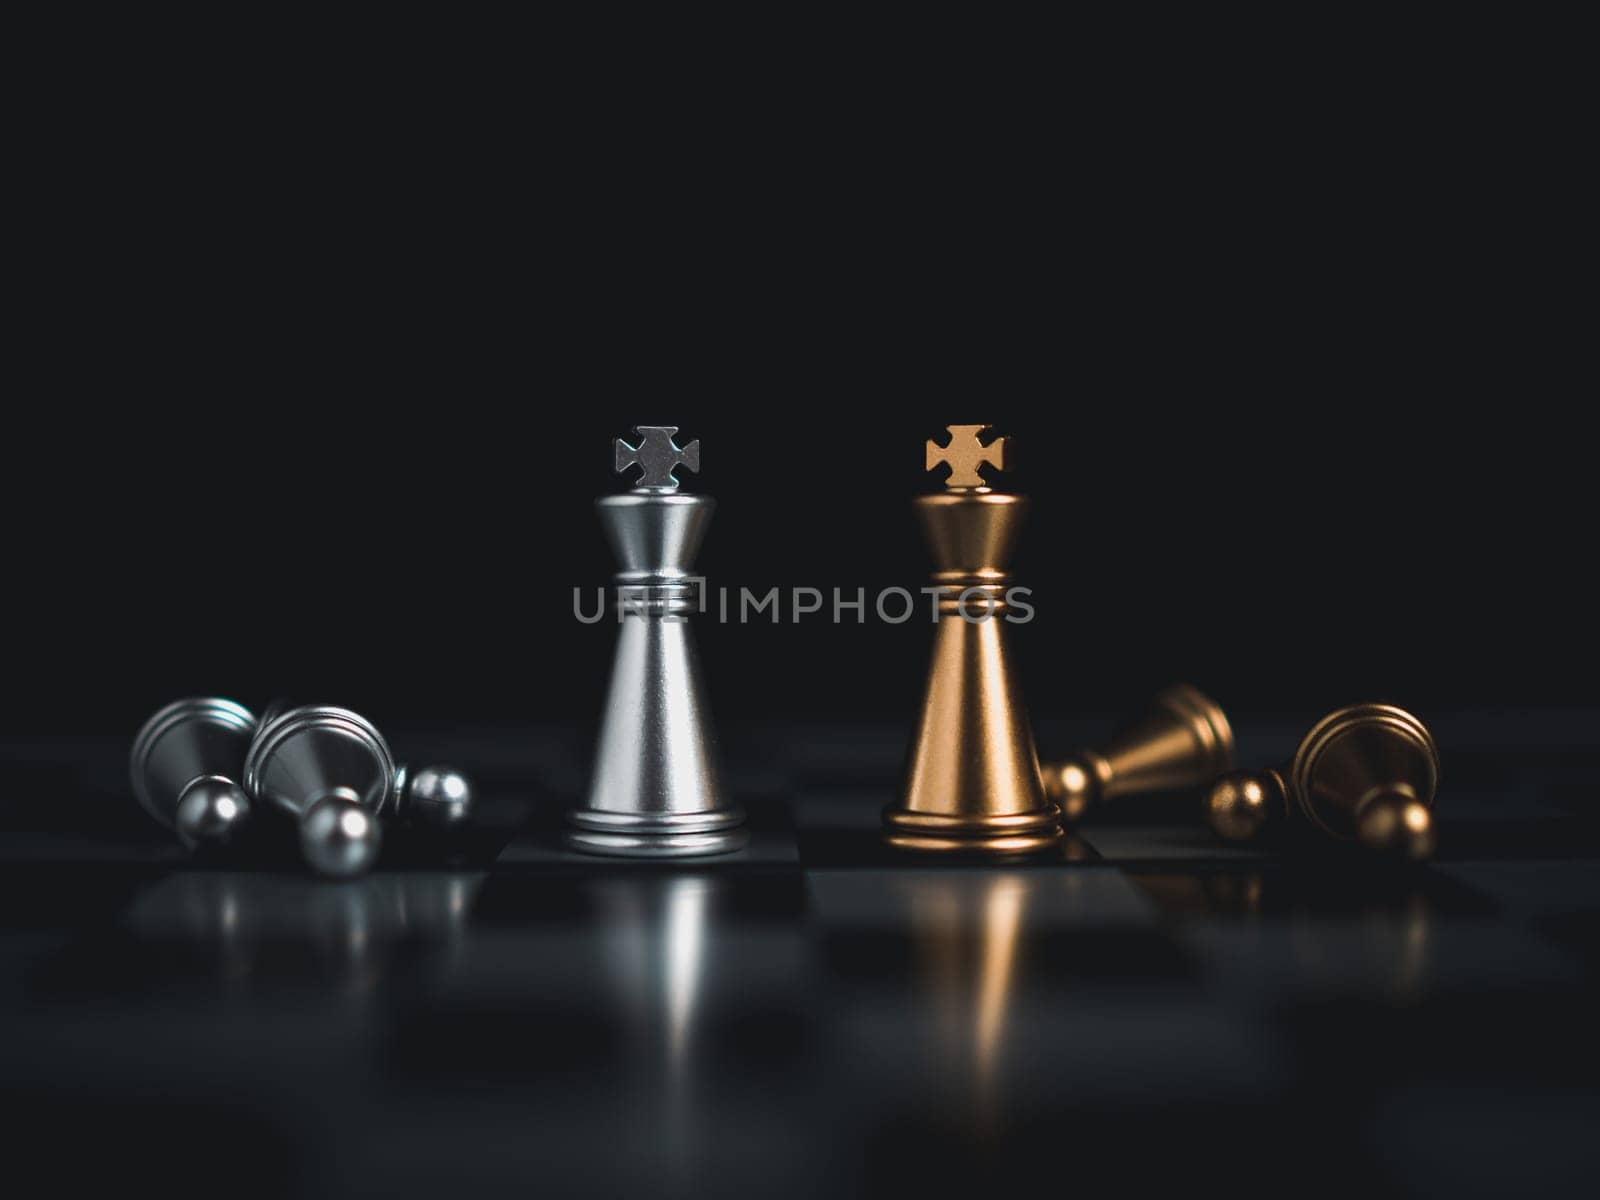 Gold and silver chess pieces in chess board game for business comparison. Leadership concepts, human resource management concepts. by Unimages2527